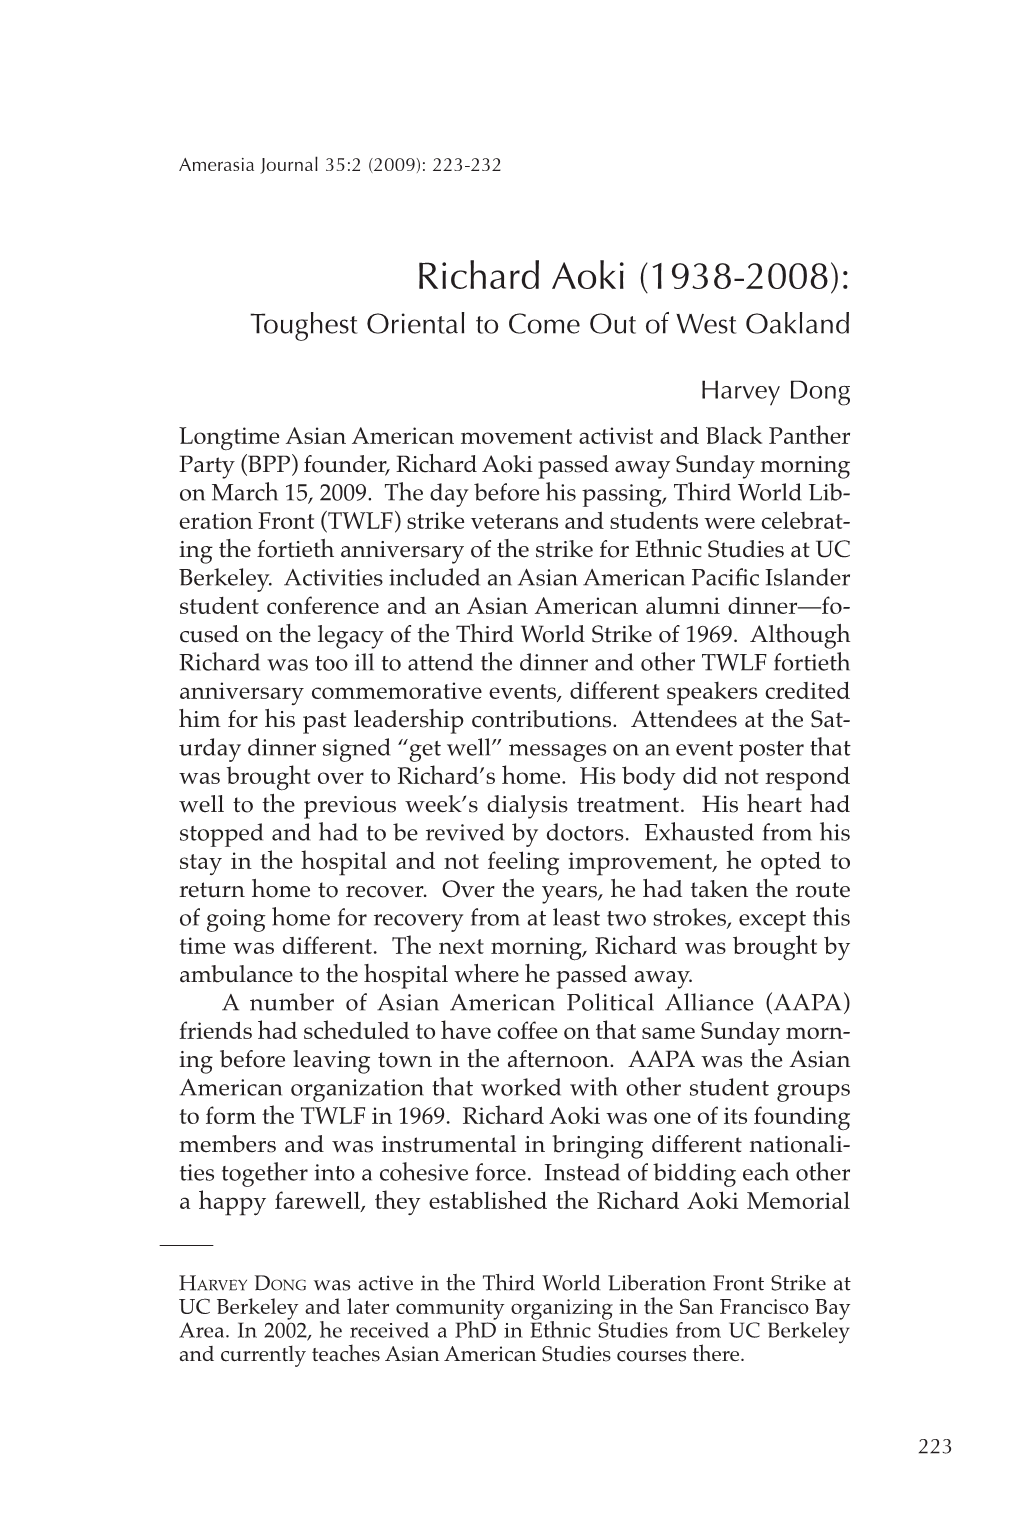 Richard Aoki (1938-2008): Toughest Oriental to Come out of West Oakland